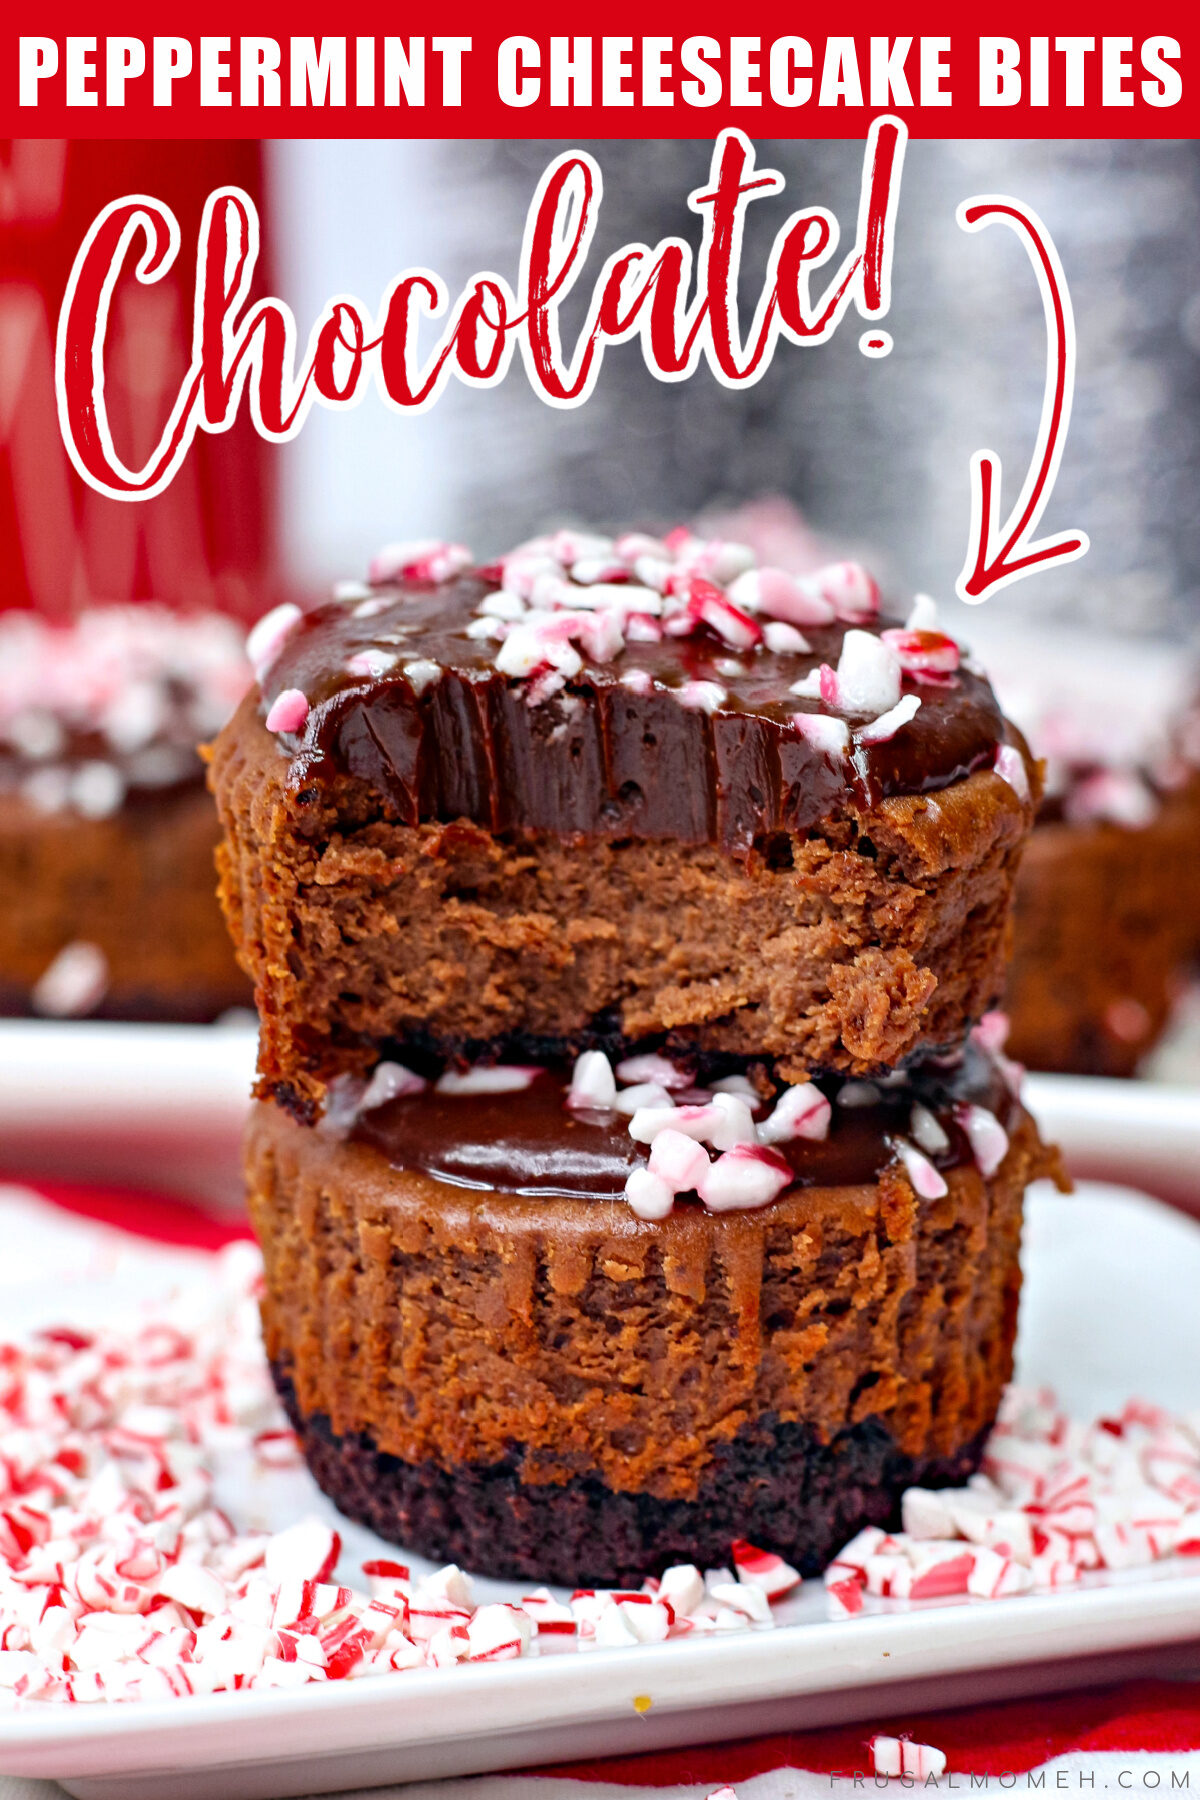 Christmas is a time for indulgence, and this recipe for mini chocolate peppermint cheesecakes hits that mark as a festive holiday favourite!